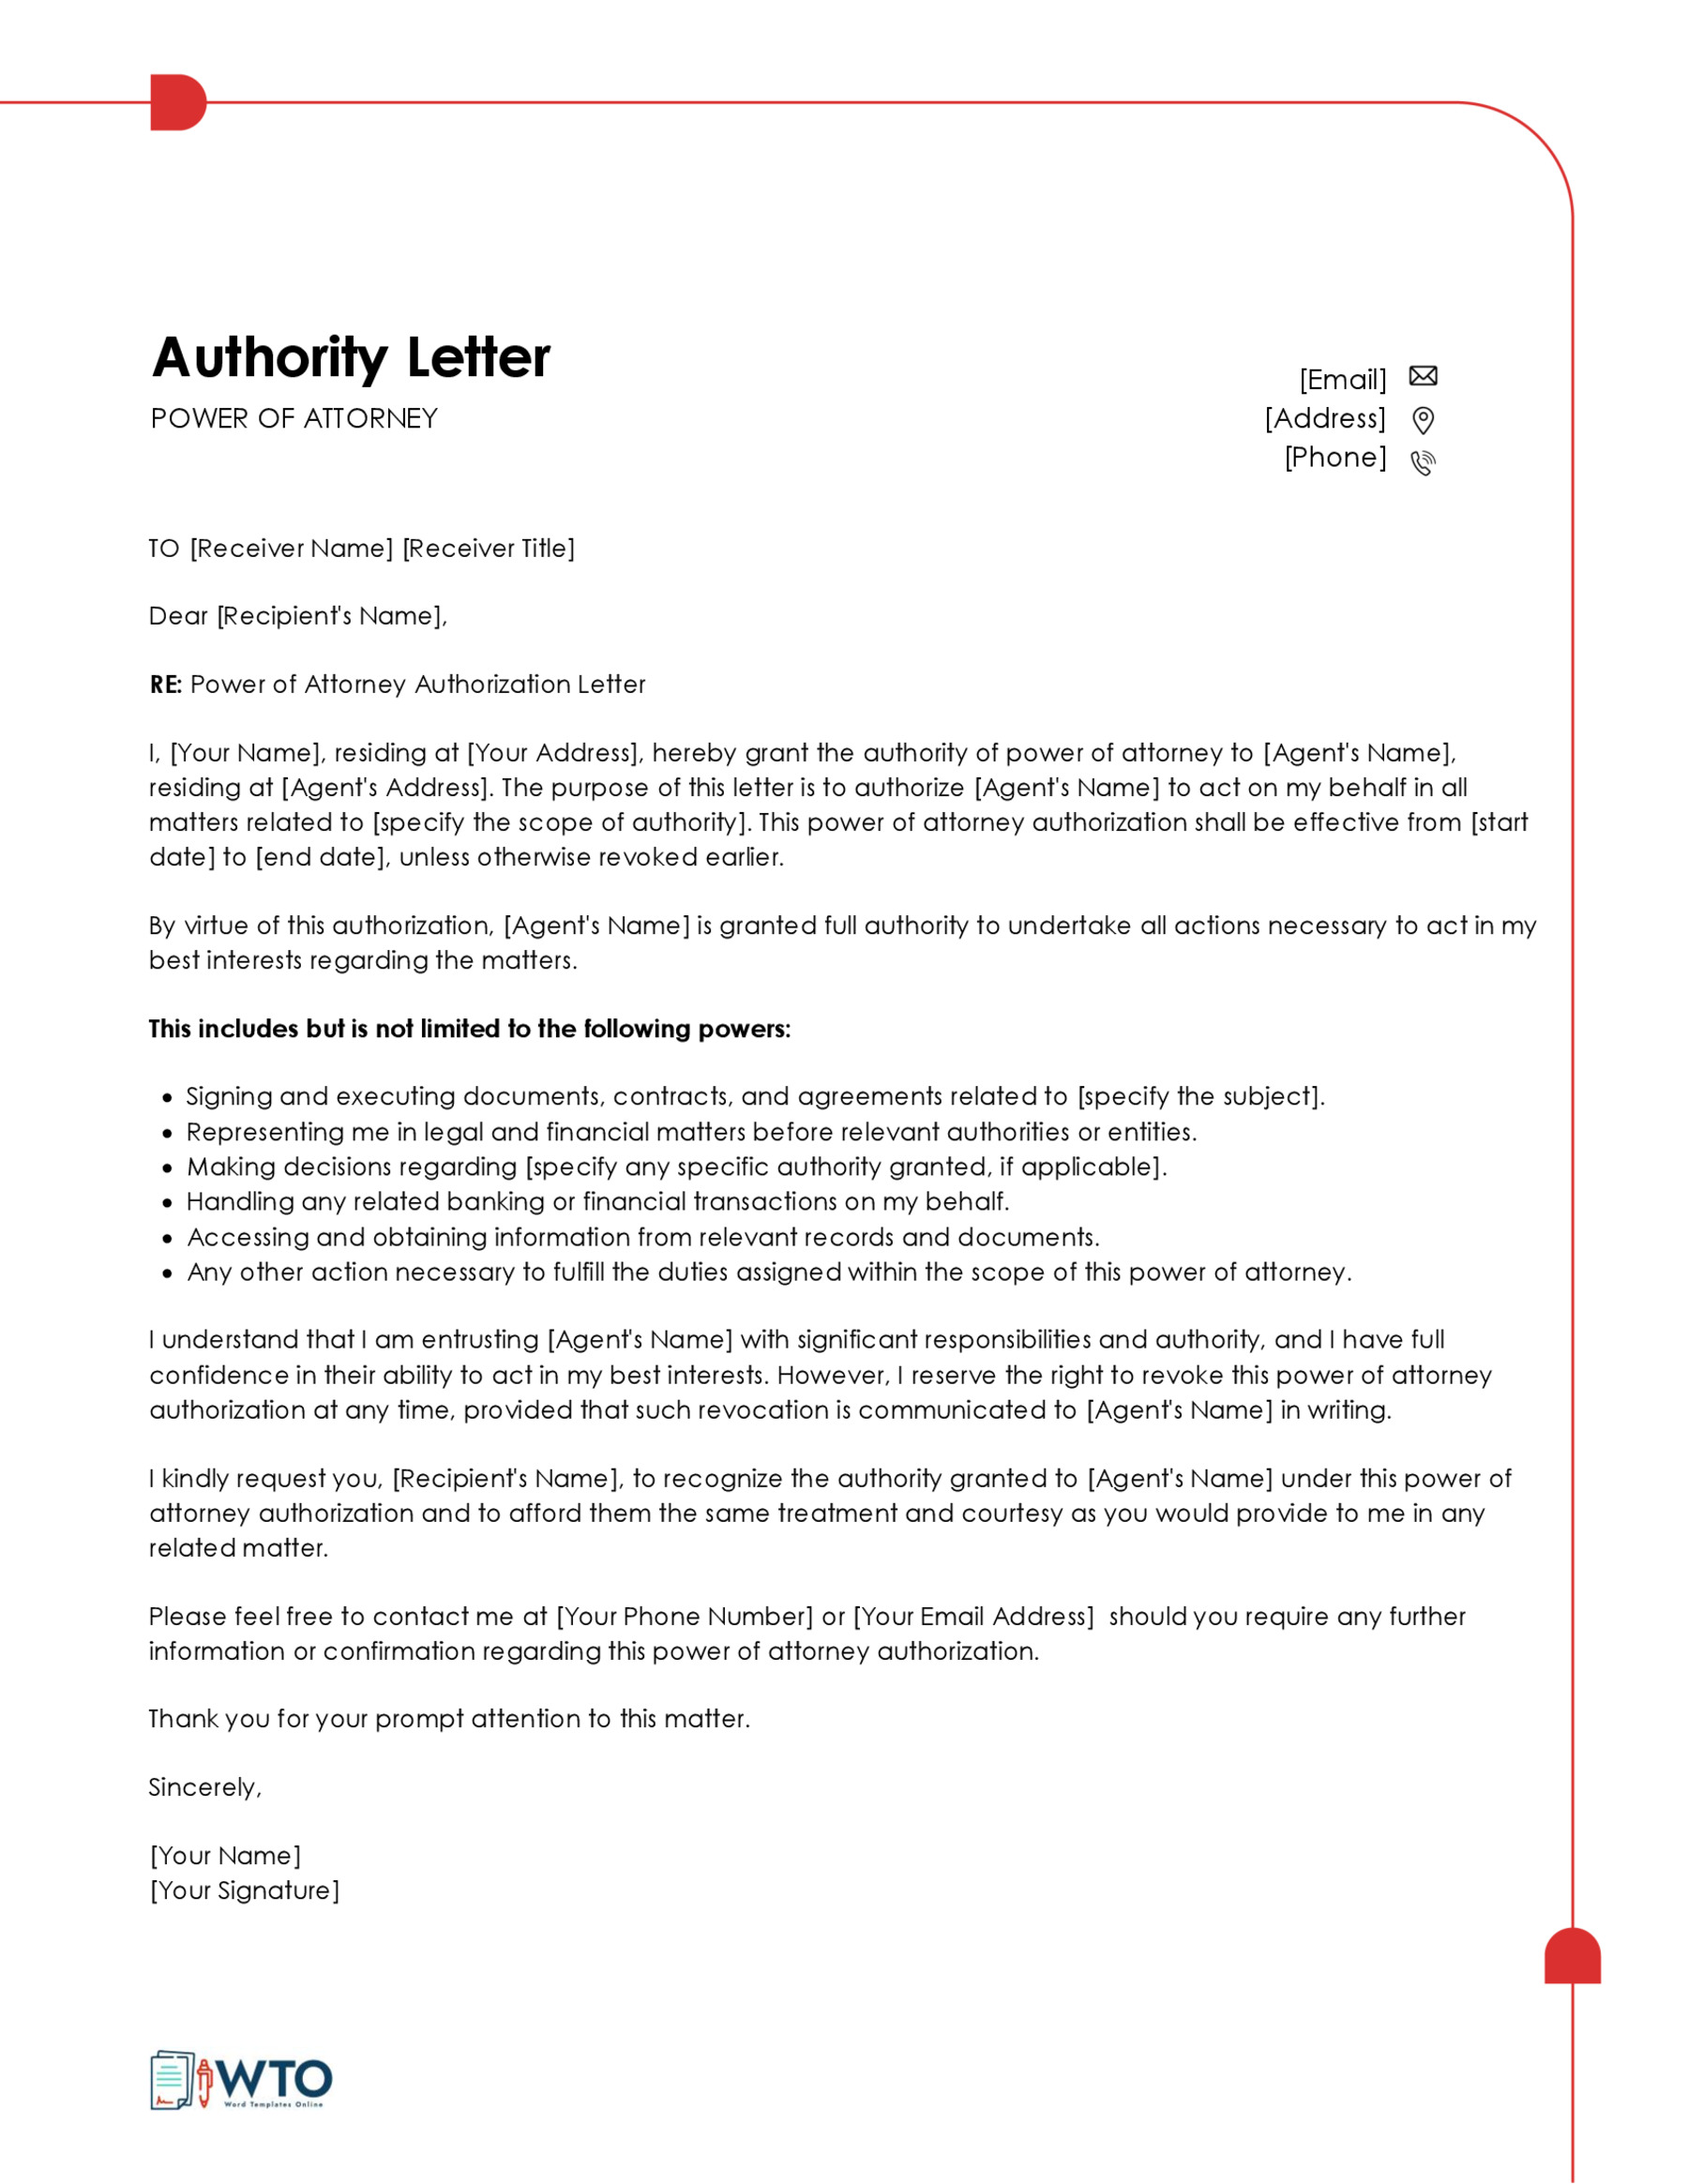 Free Power of Attorney Authorization Letter Template 05 for Word